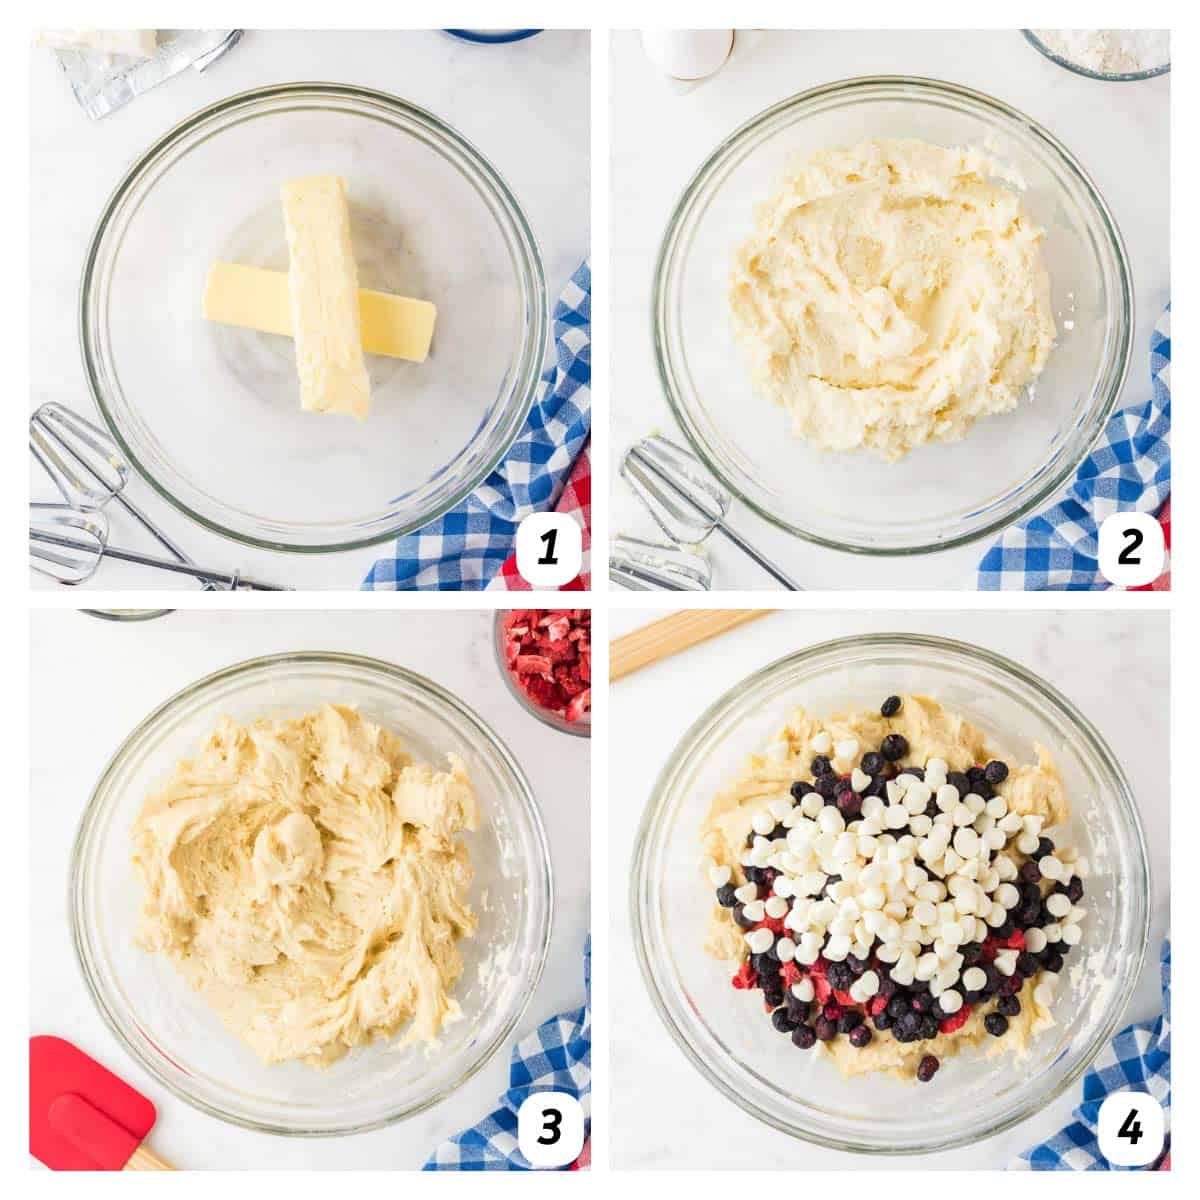 Four panel grid of process shots 1-4 - creaming together butter and sugar, adding eggs and vanilla, combining dry ingredients separately, combining mixtures together, and adding toppings.